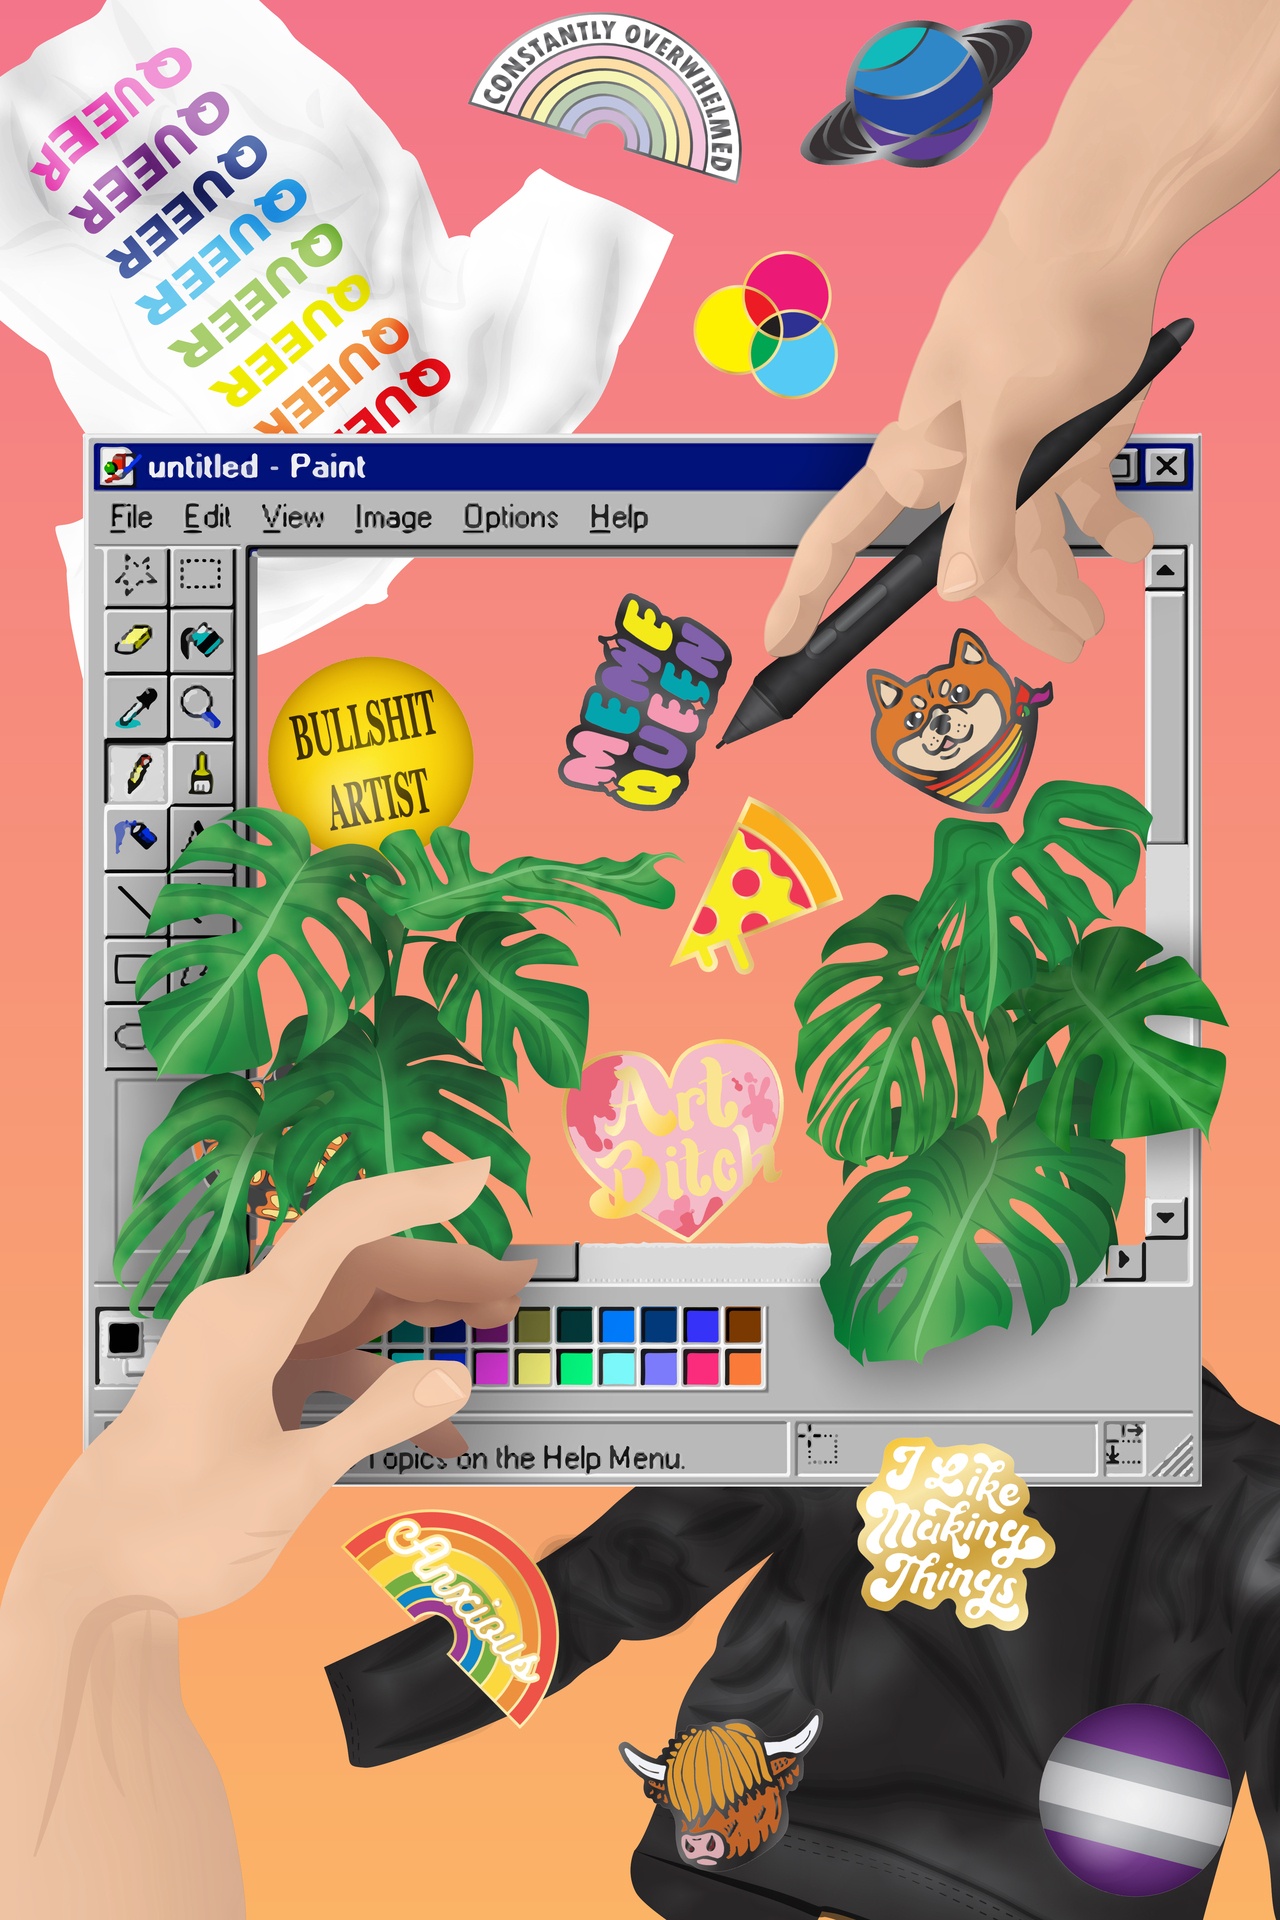 Digital collage of hands, MS paint, and other visual elements